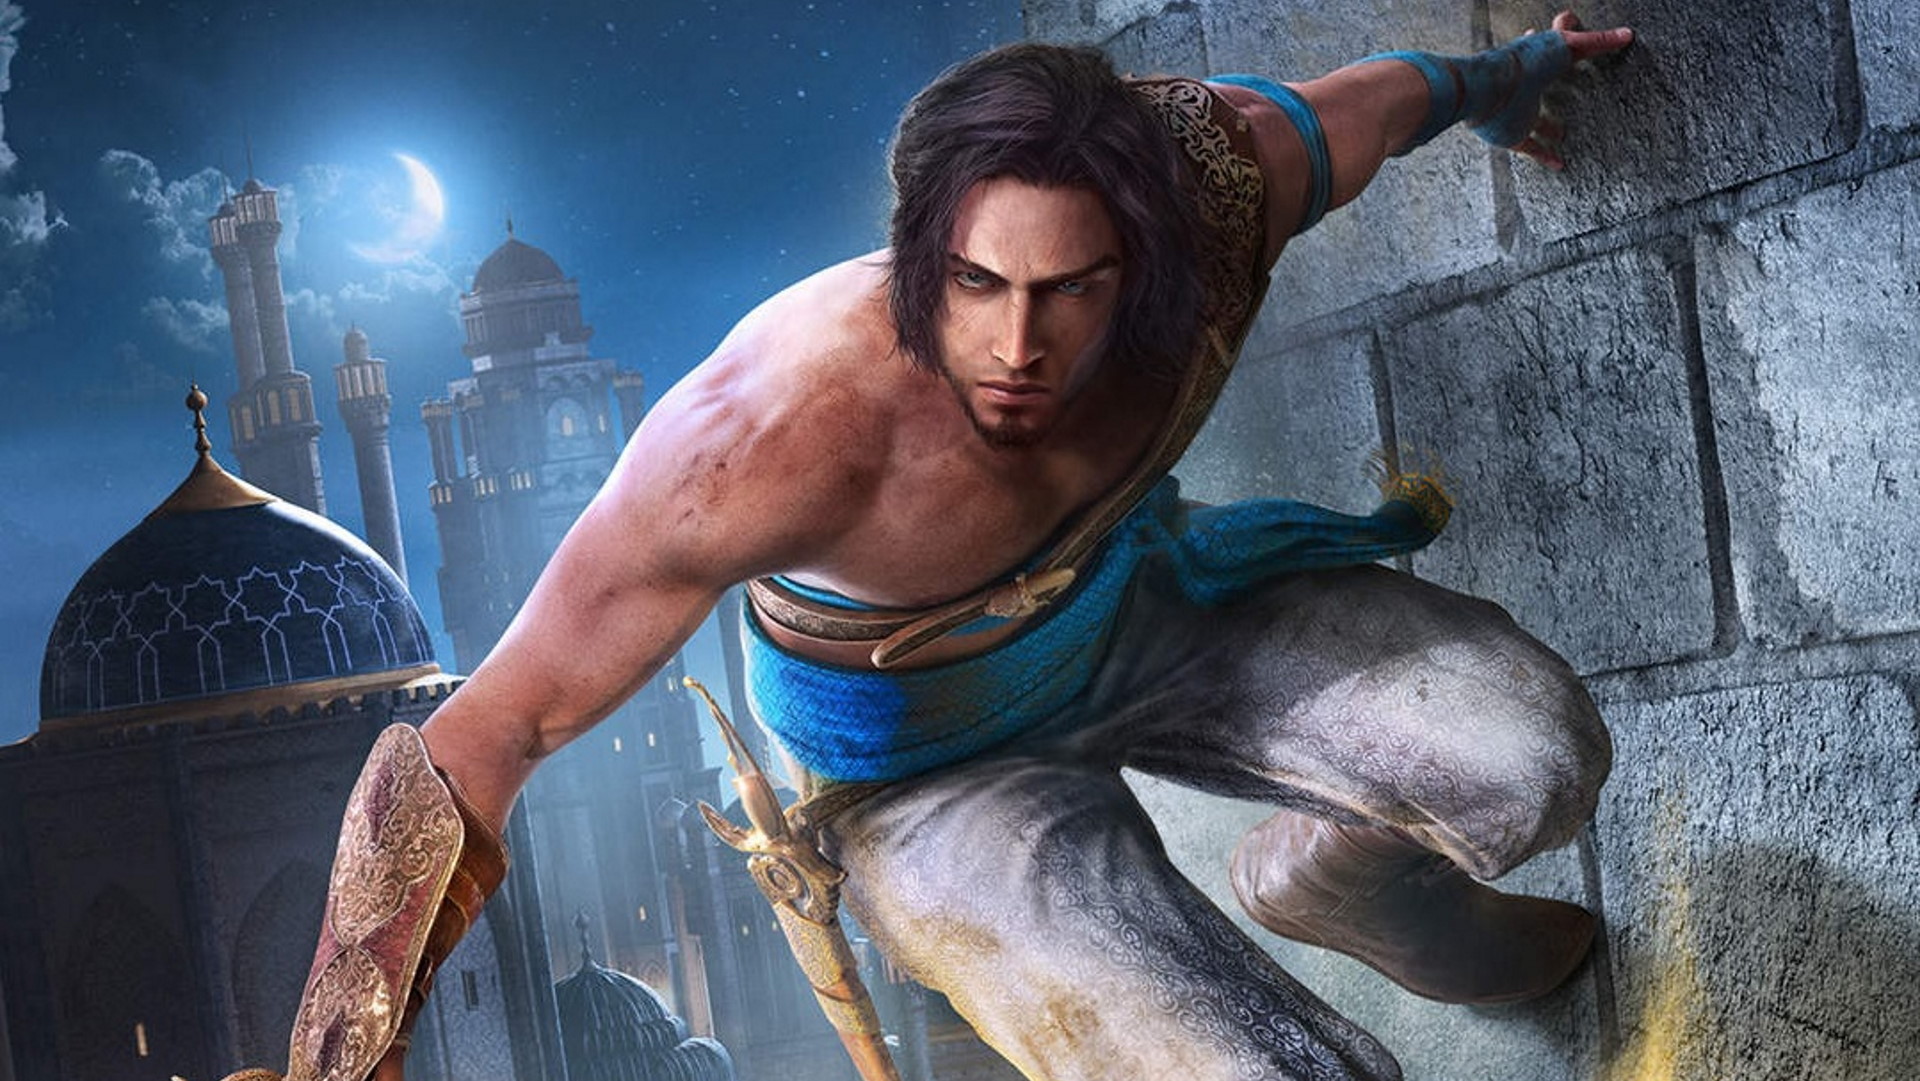 Prince of Persia: The Sands of Time Remake Release Date and